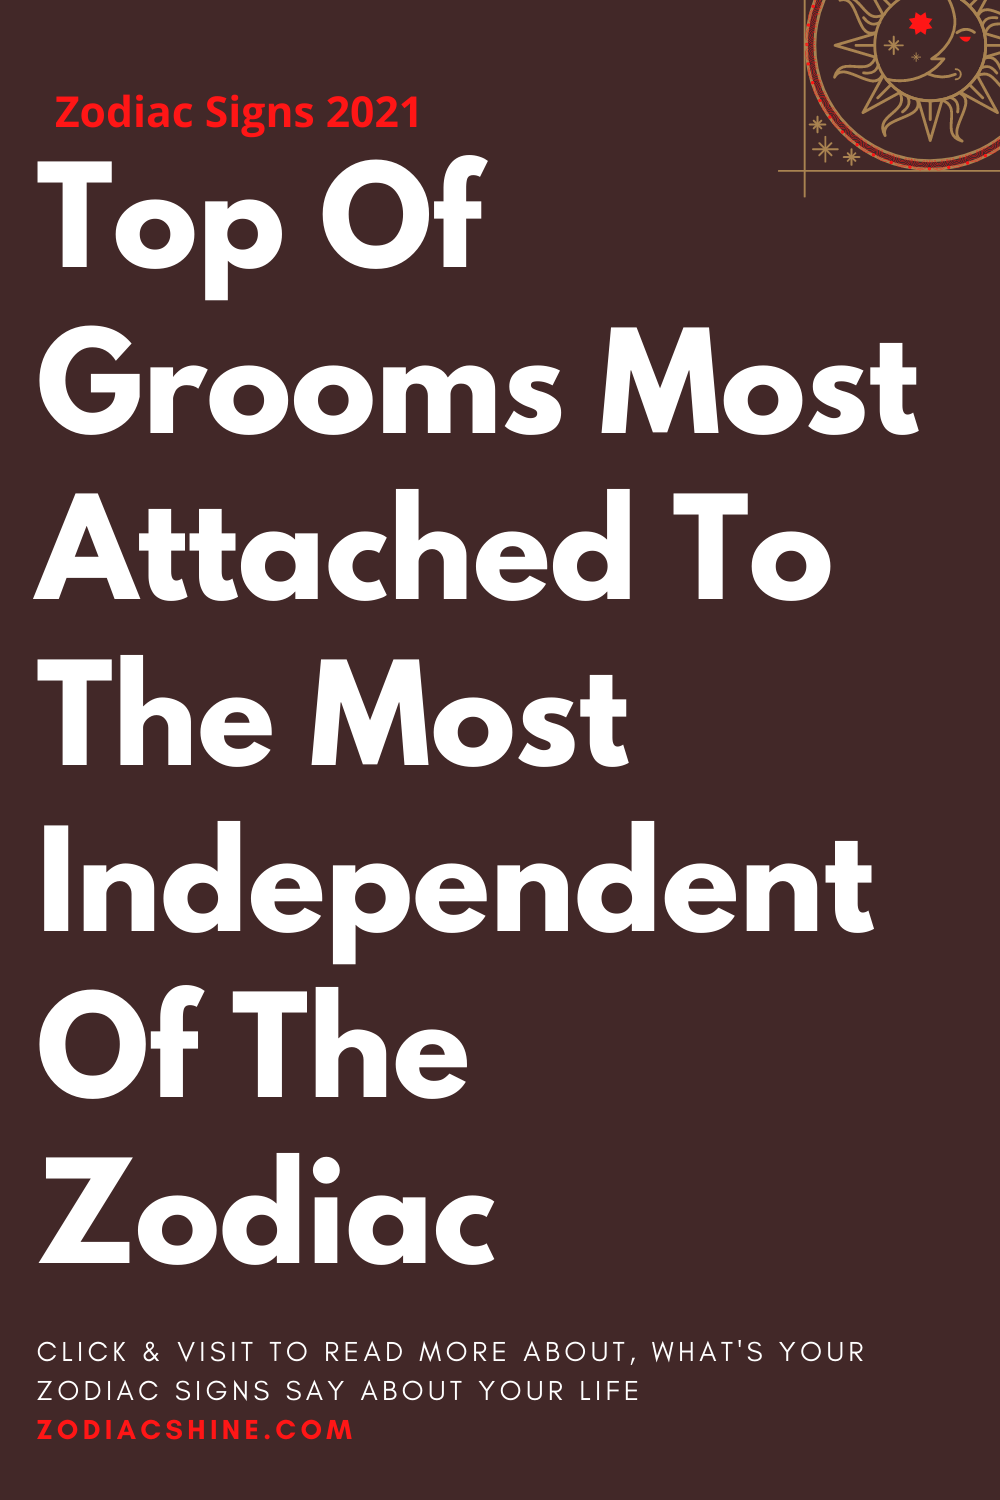 Top Of Grooms Most Attached To The Most Independent Of The Zodiac